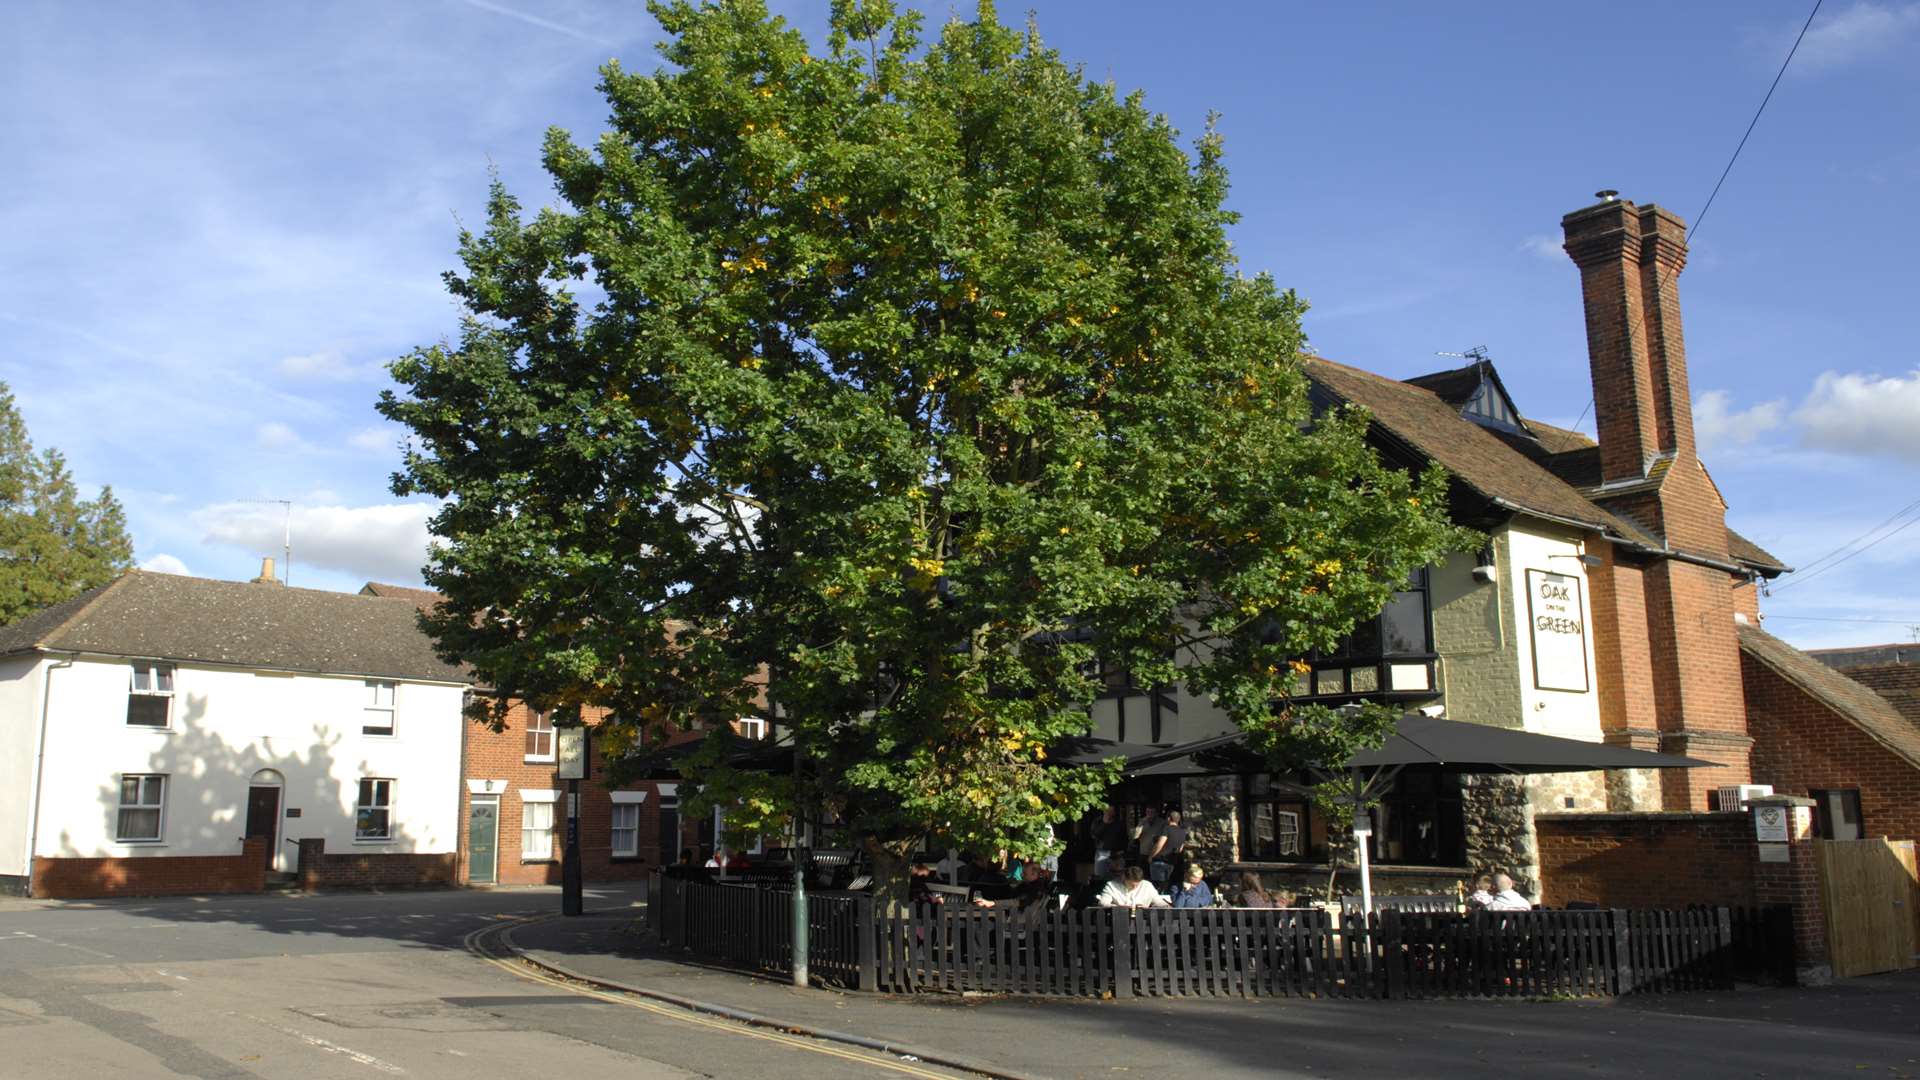 The Oak on the Green in Bearsted